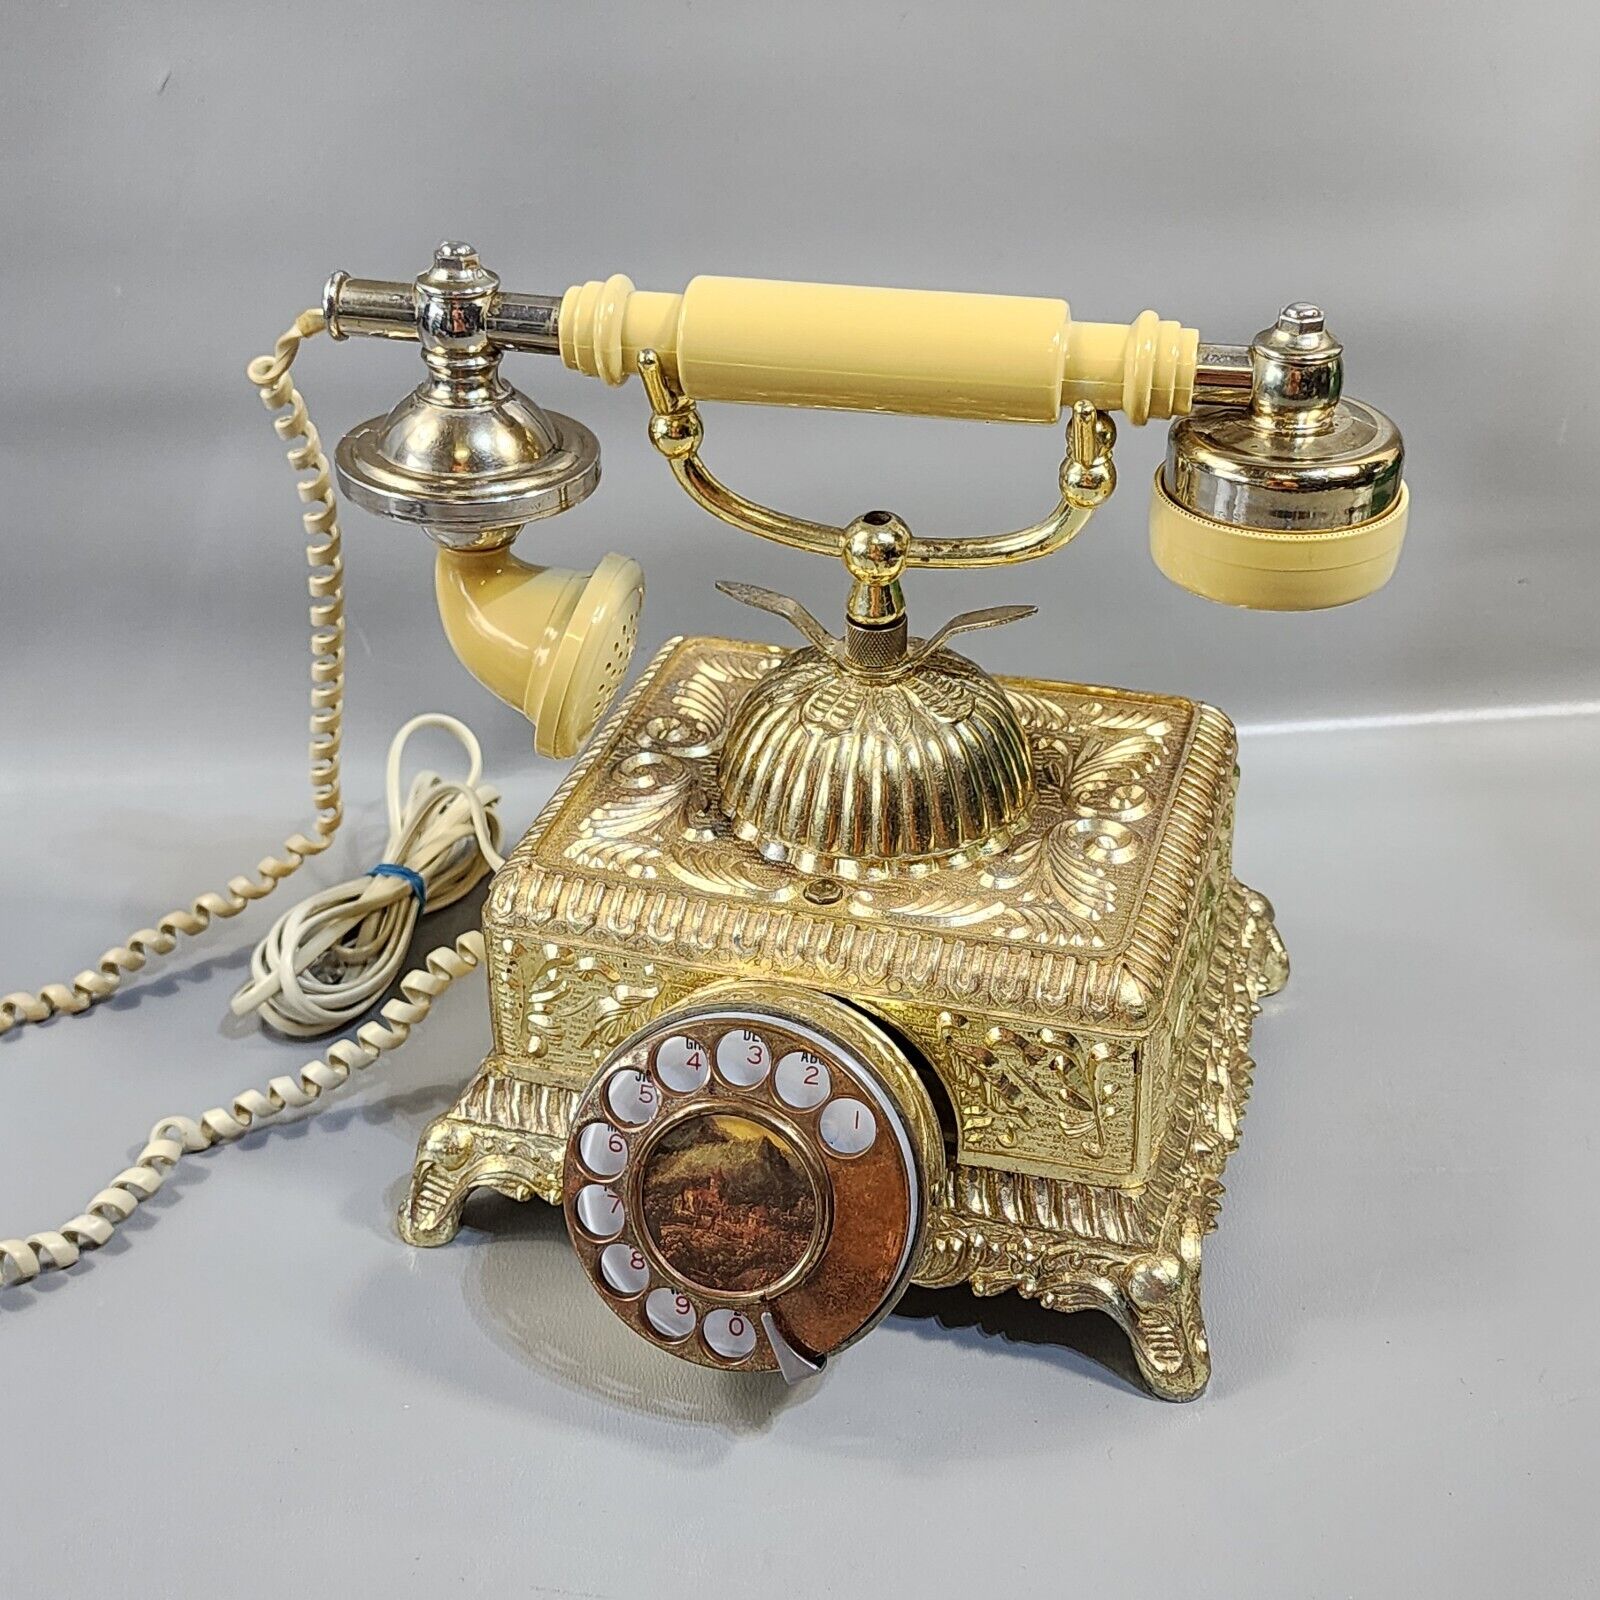 Vintage French Style Rotary Telephone Brass Gold Tone 1970s Prop Decor Phone